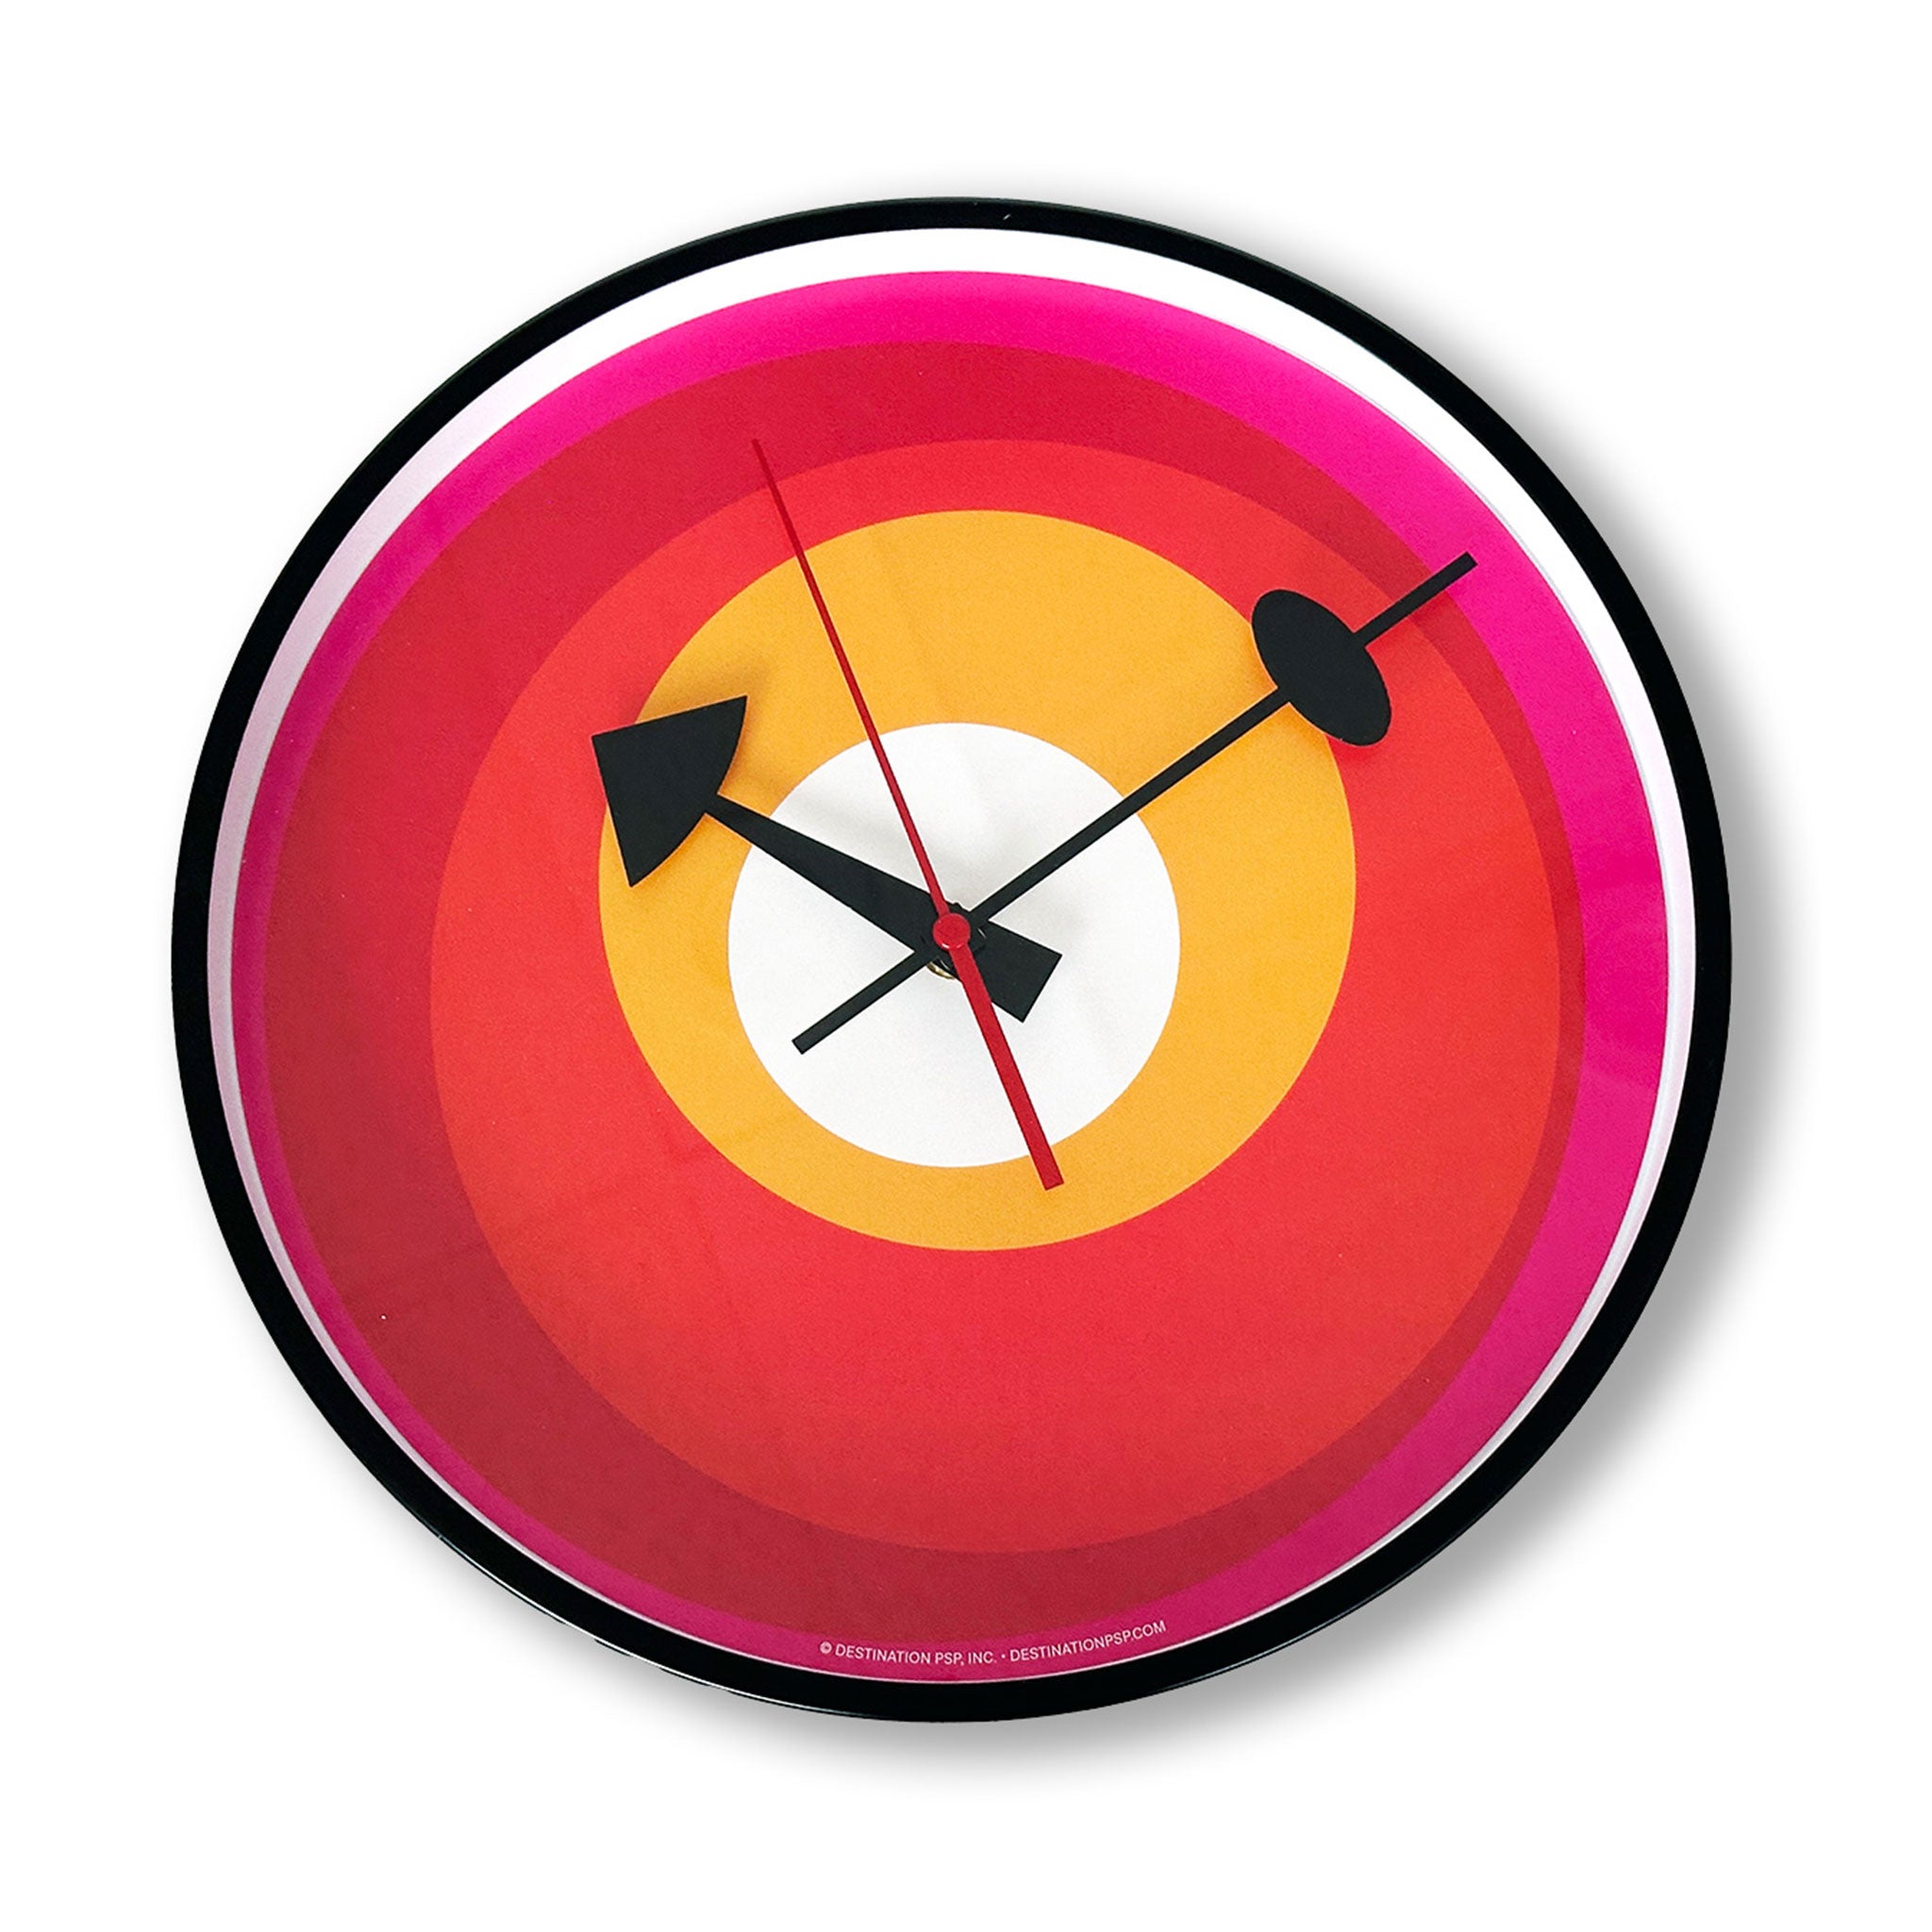 Mod wall clock with no numbers but just red, yellow, pink and white circles